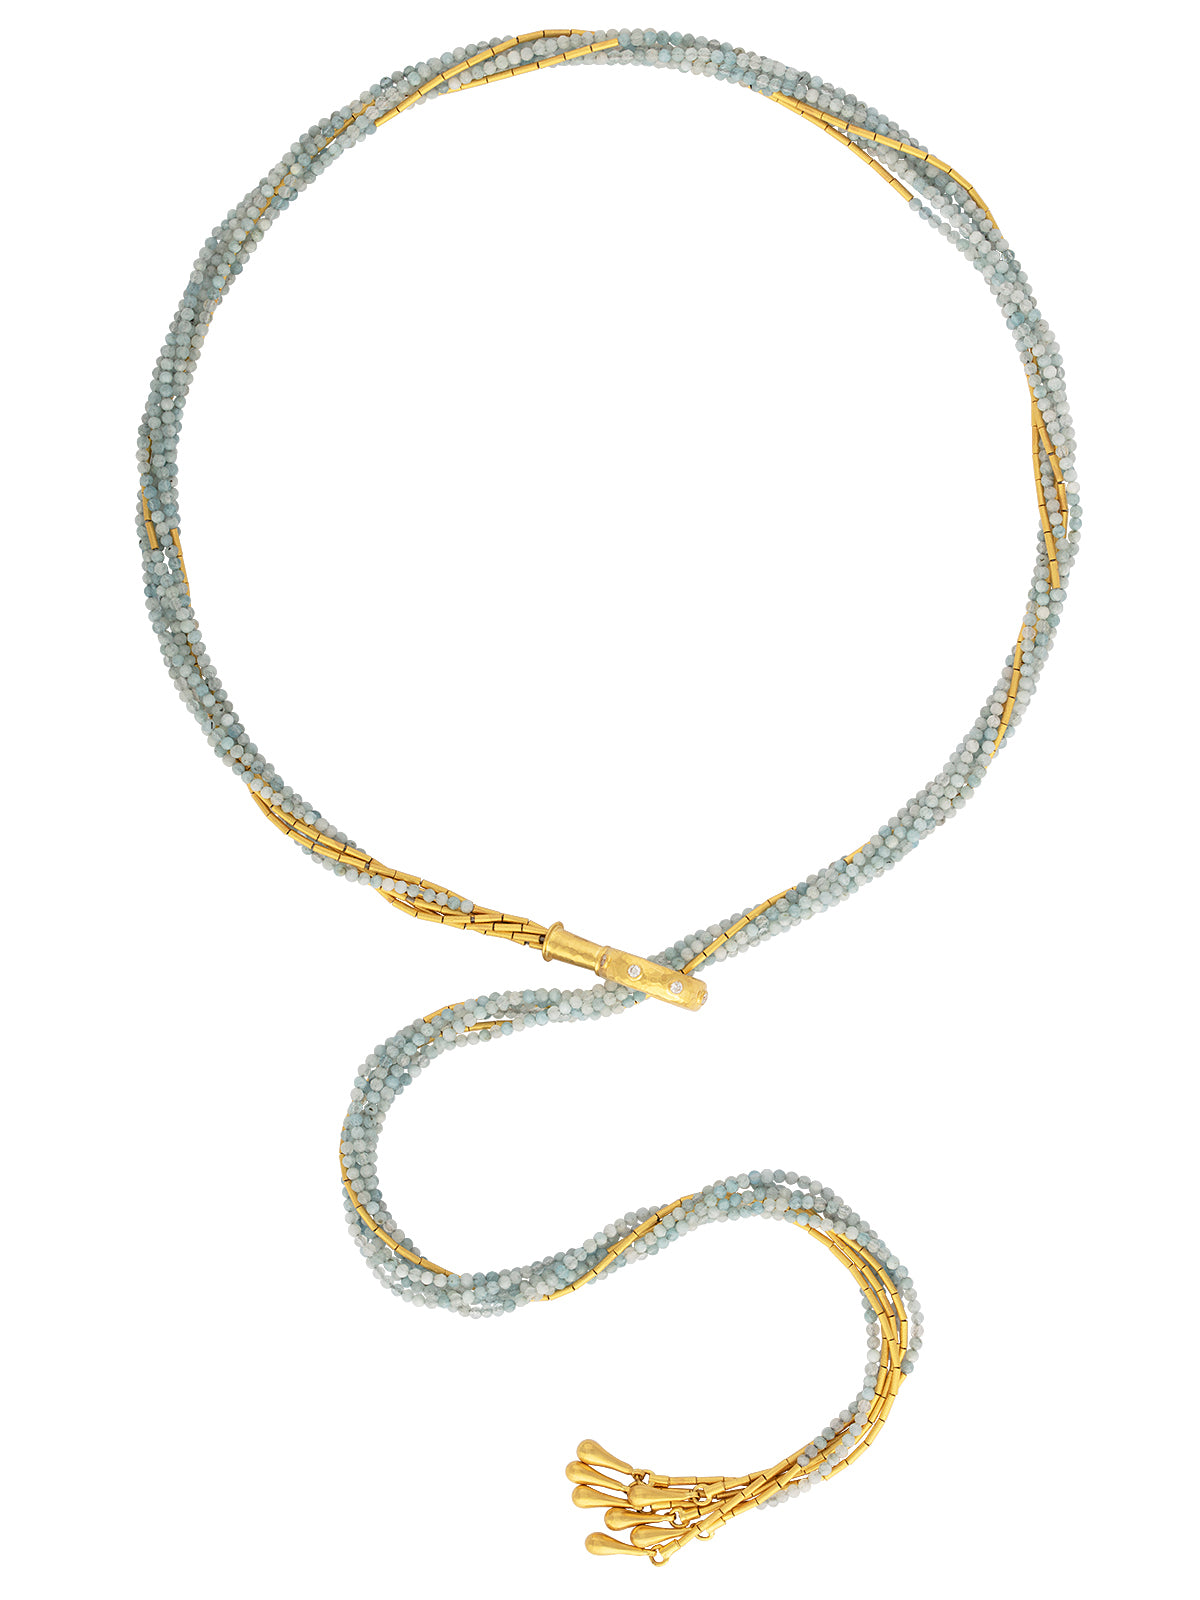 NONNA Necklace in 14k Gold